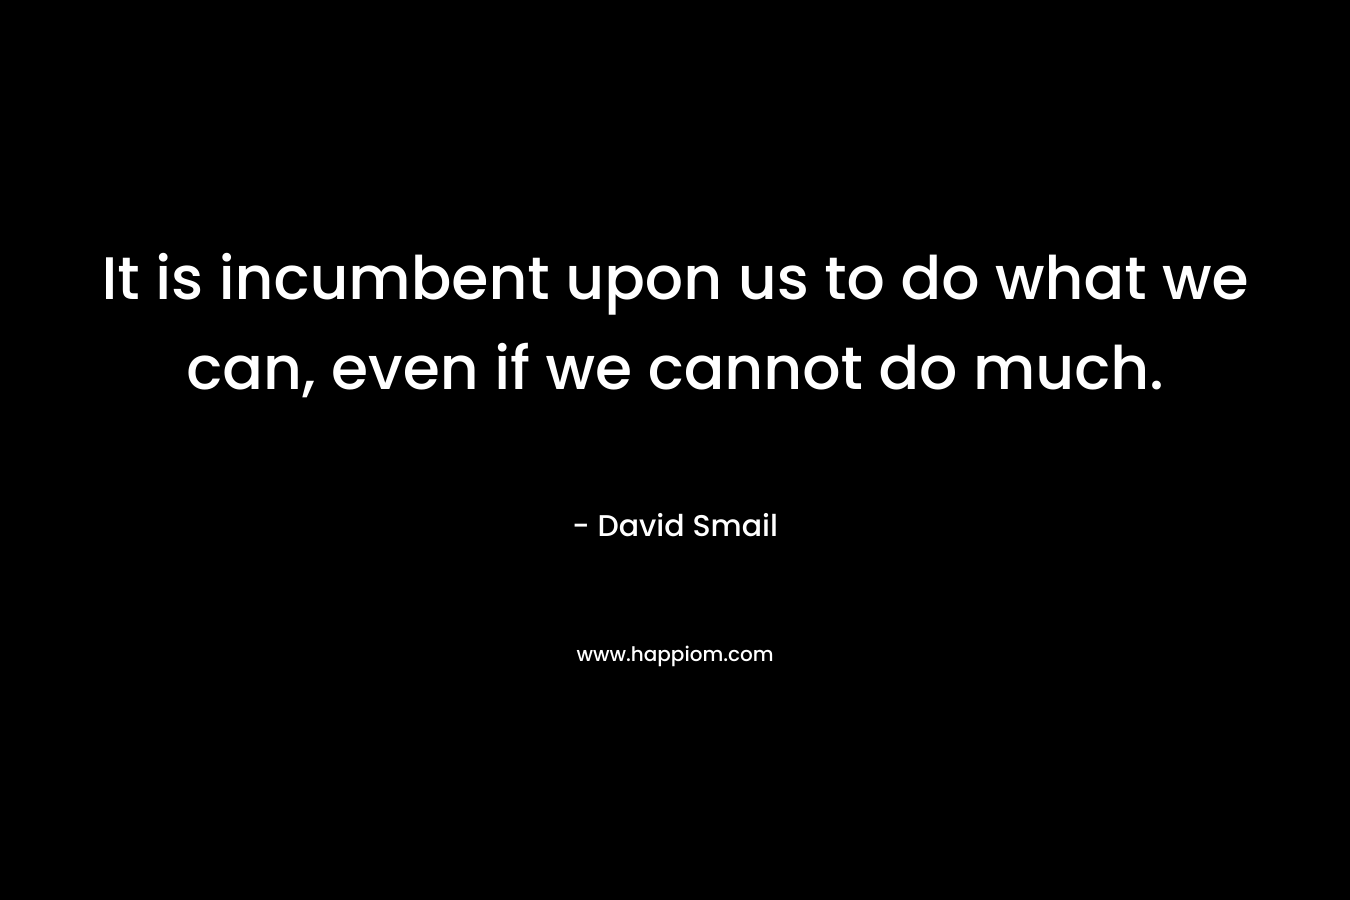 It is incumbent upon us to do what we can, even if we cannot do much. – David Smail